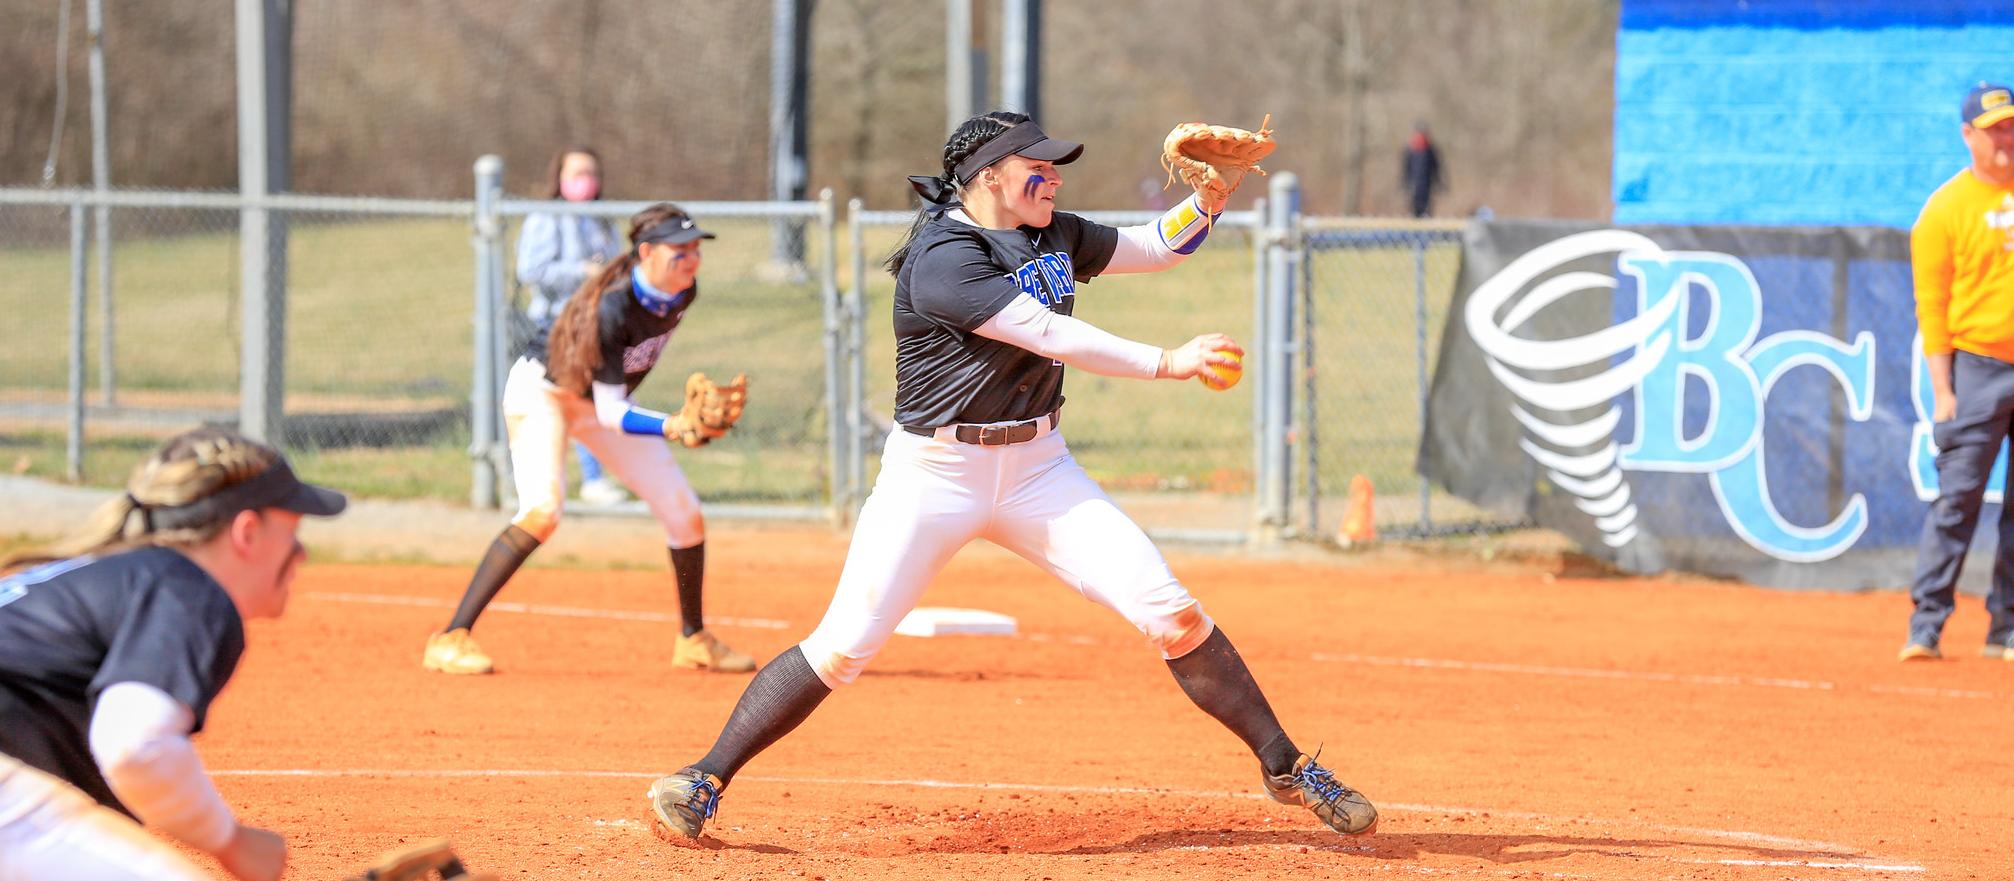 Ali Grace Hartman earned her first victory of the 2021 season to clinch a Senior Day doubleheader sweep for BC softball (Photo courtesy of Victoria Brayman '22).